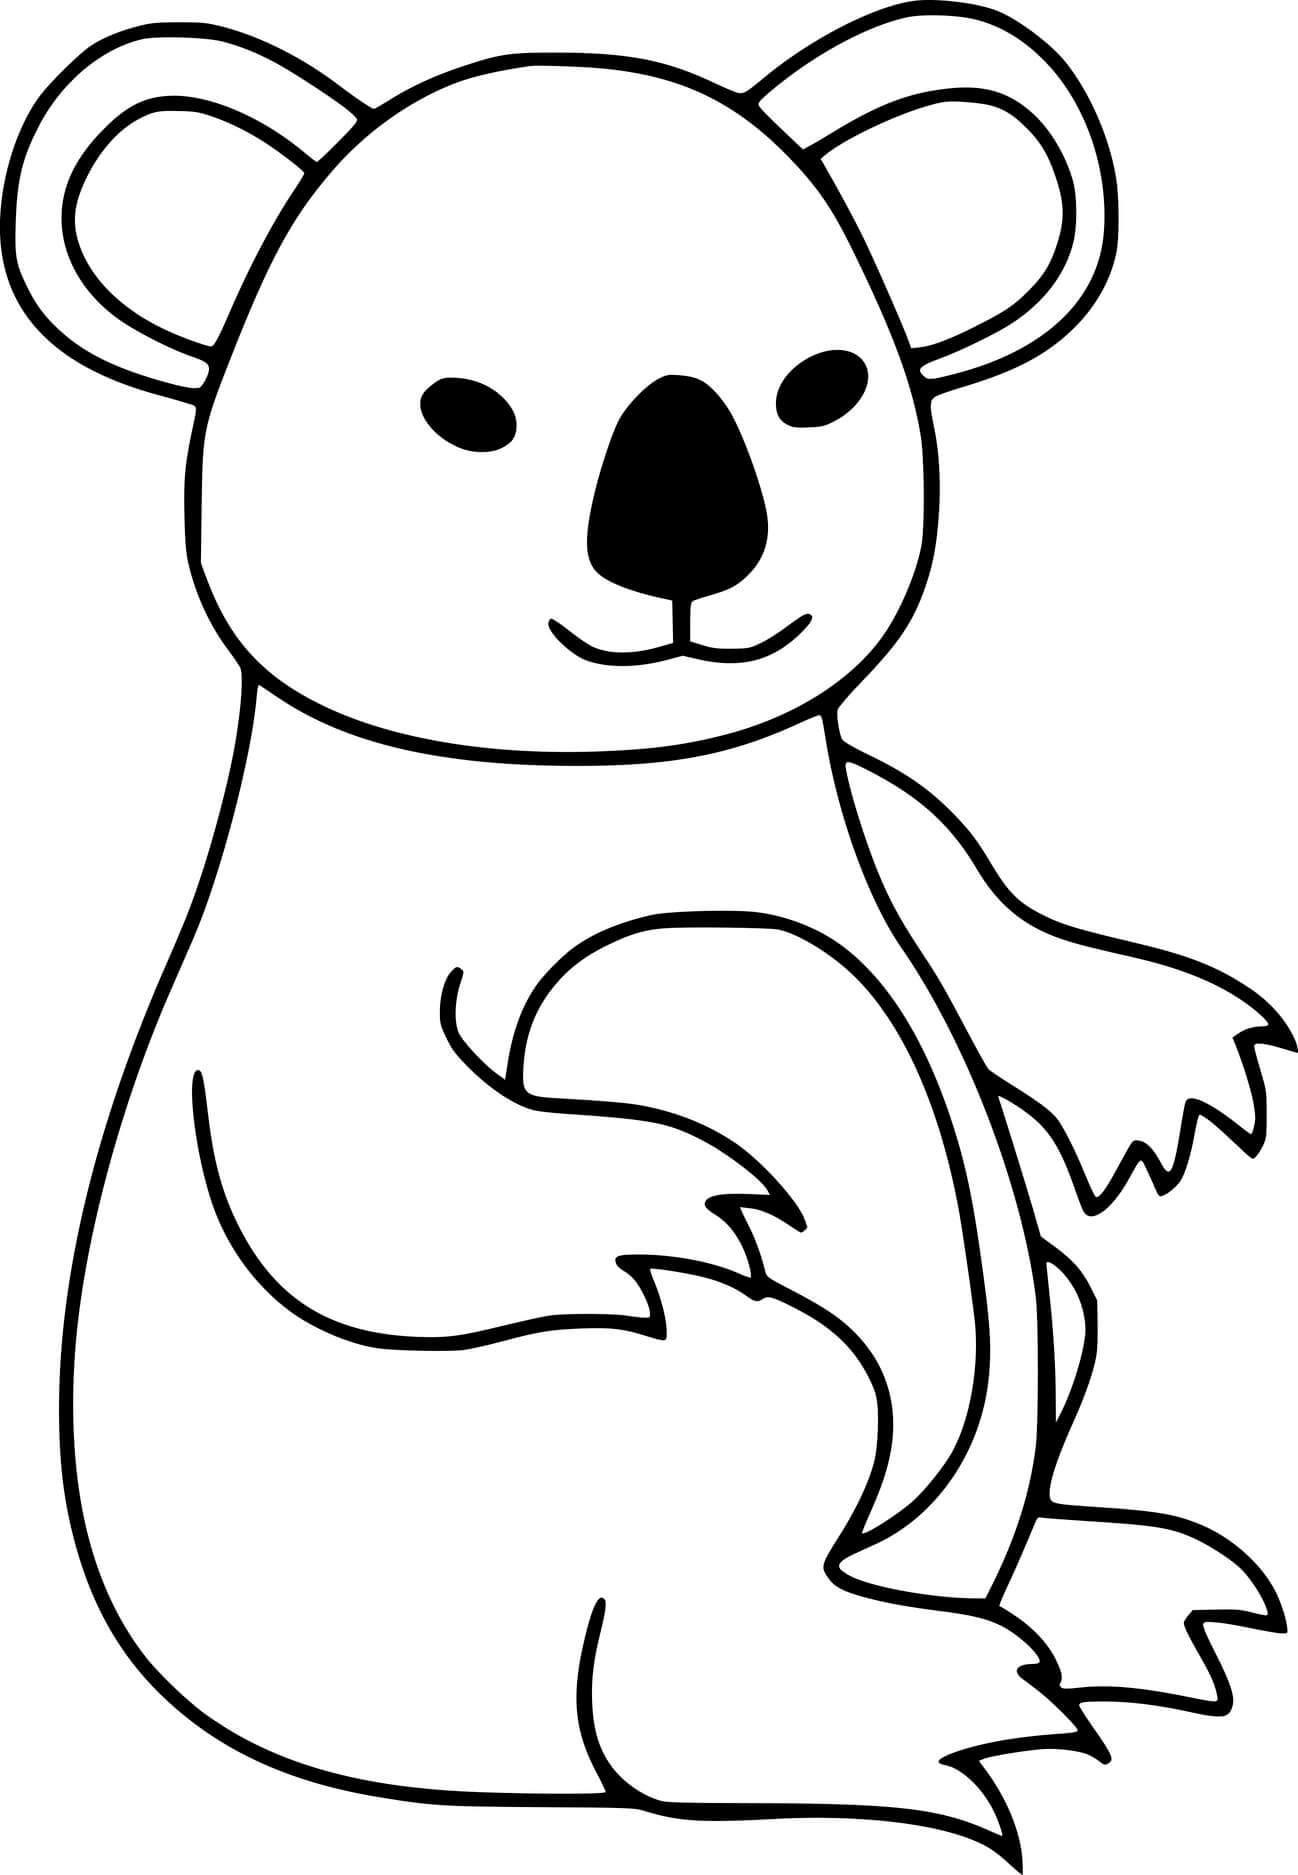 Very Simple Koala Coloring Page